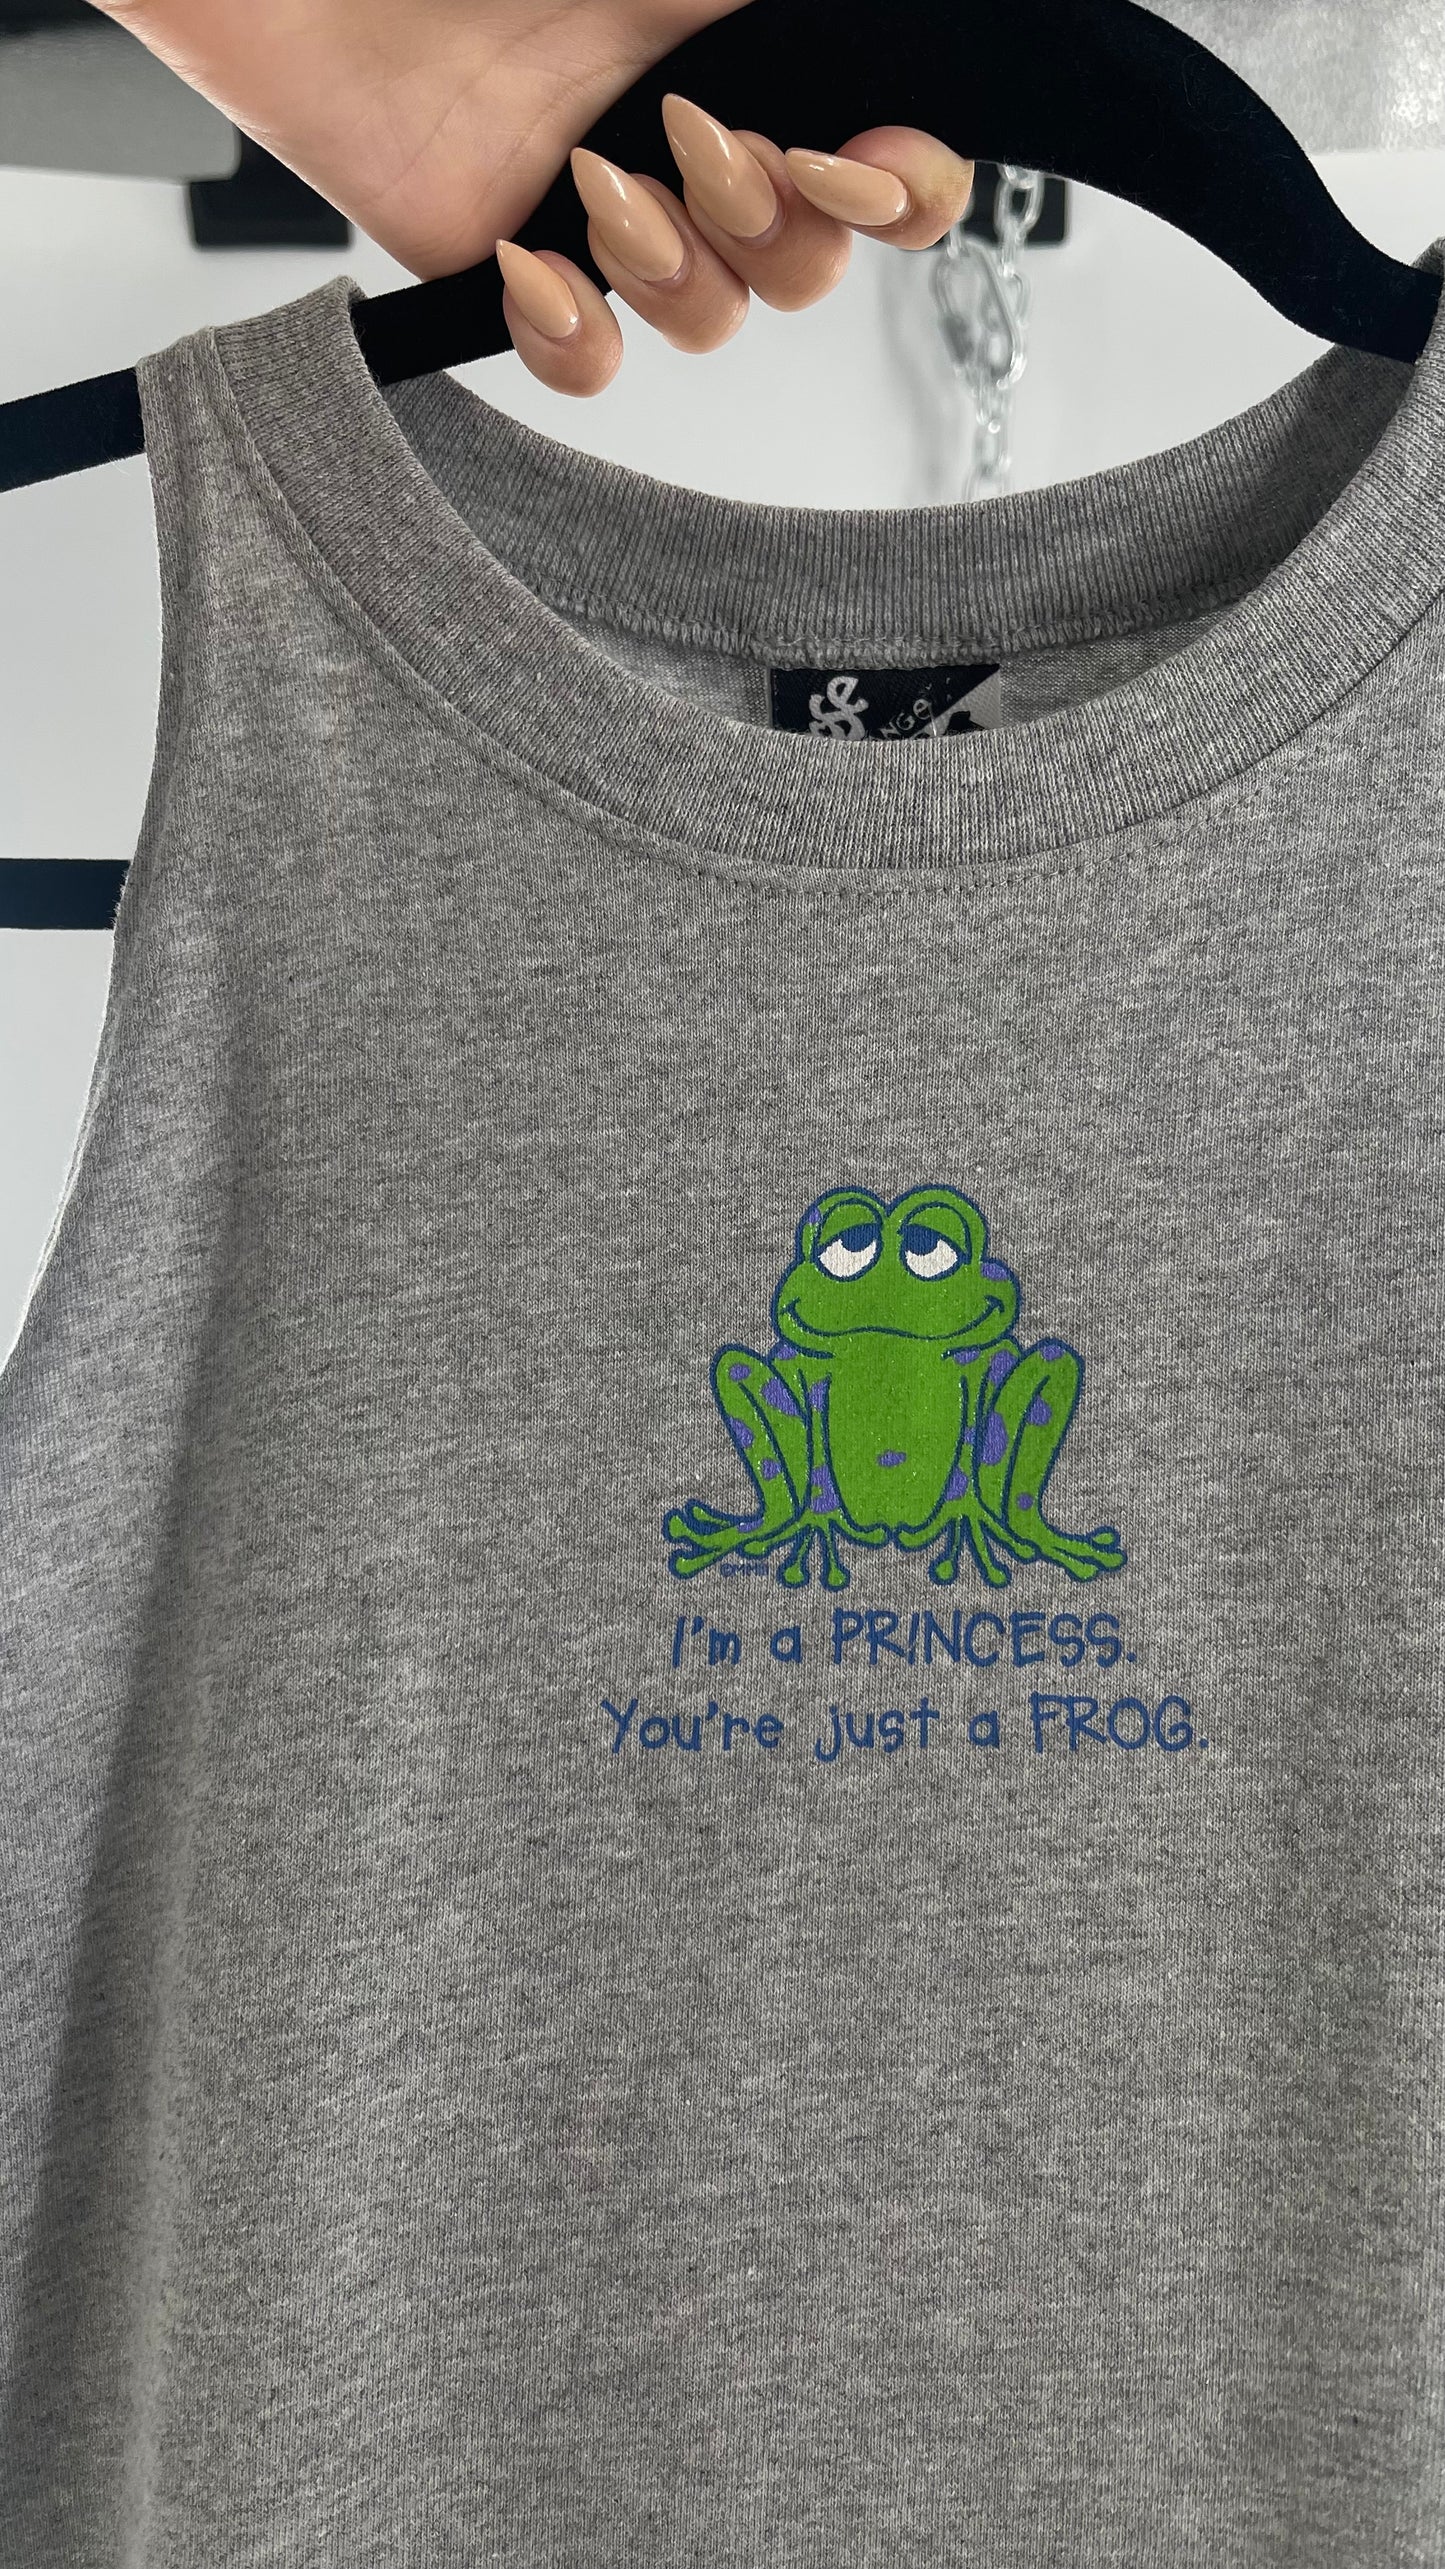 Deadstock Vintage Cropped Tank “I’m a Princess. You’re just a frog”